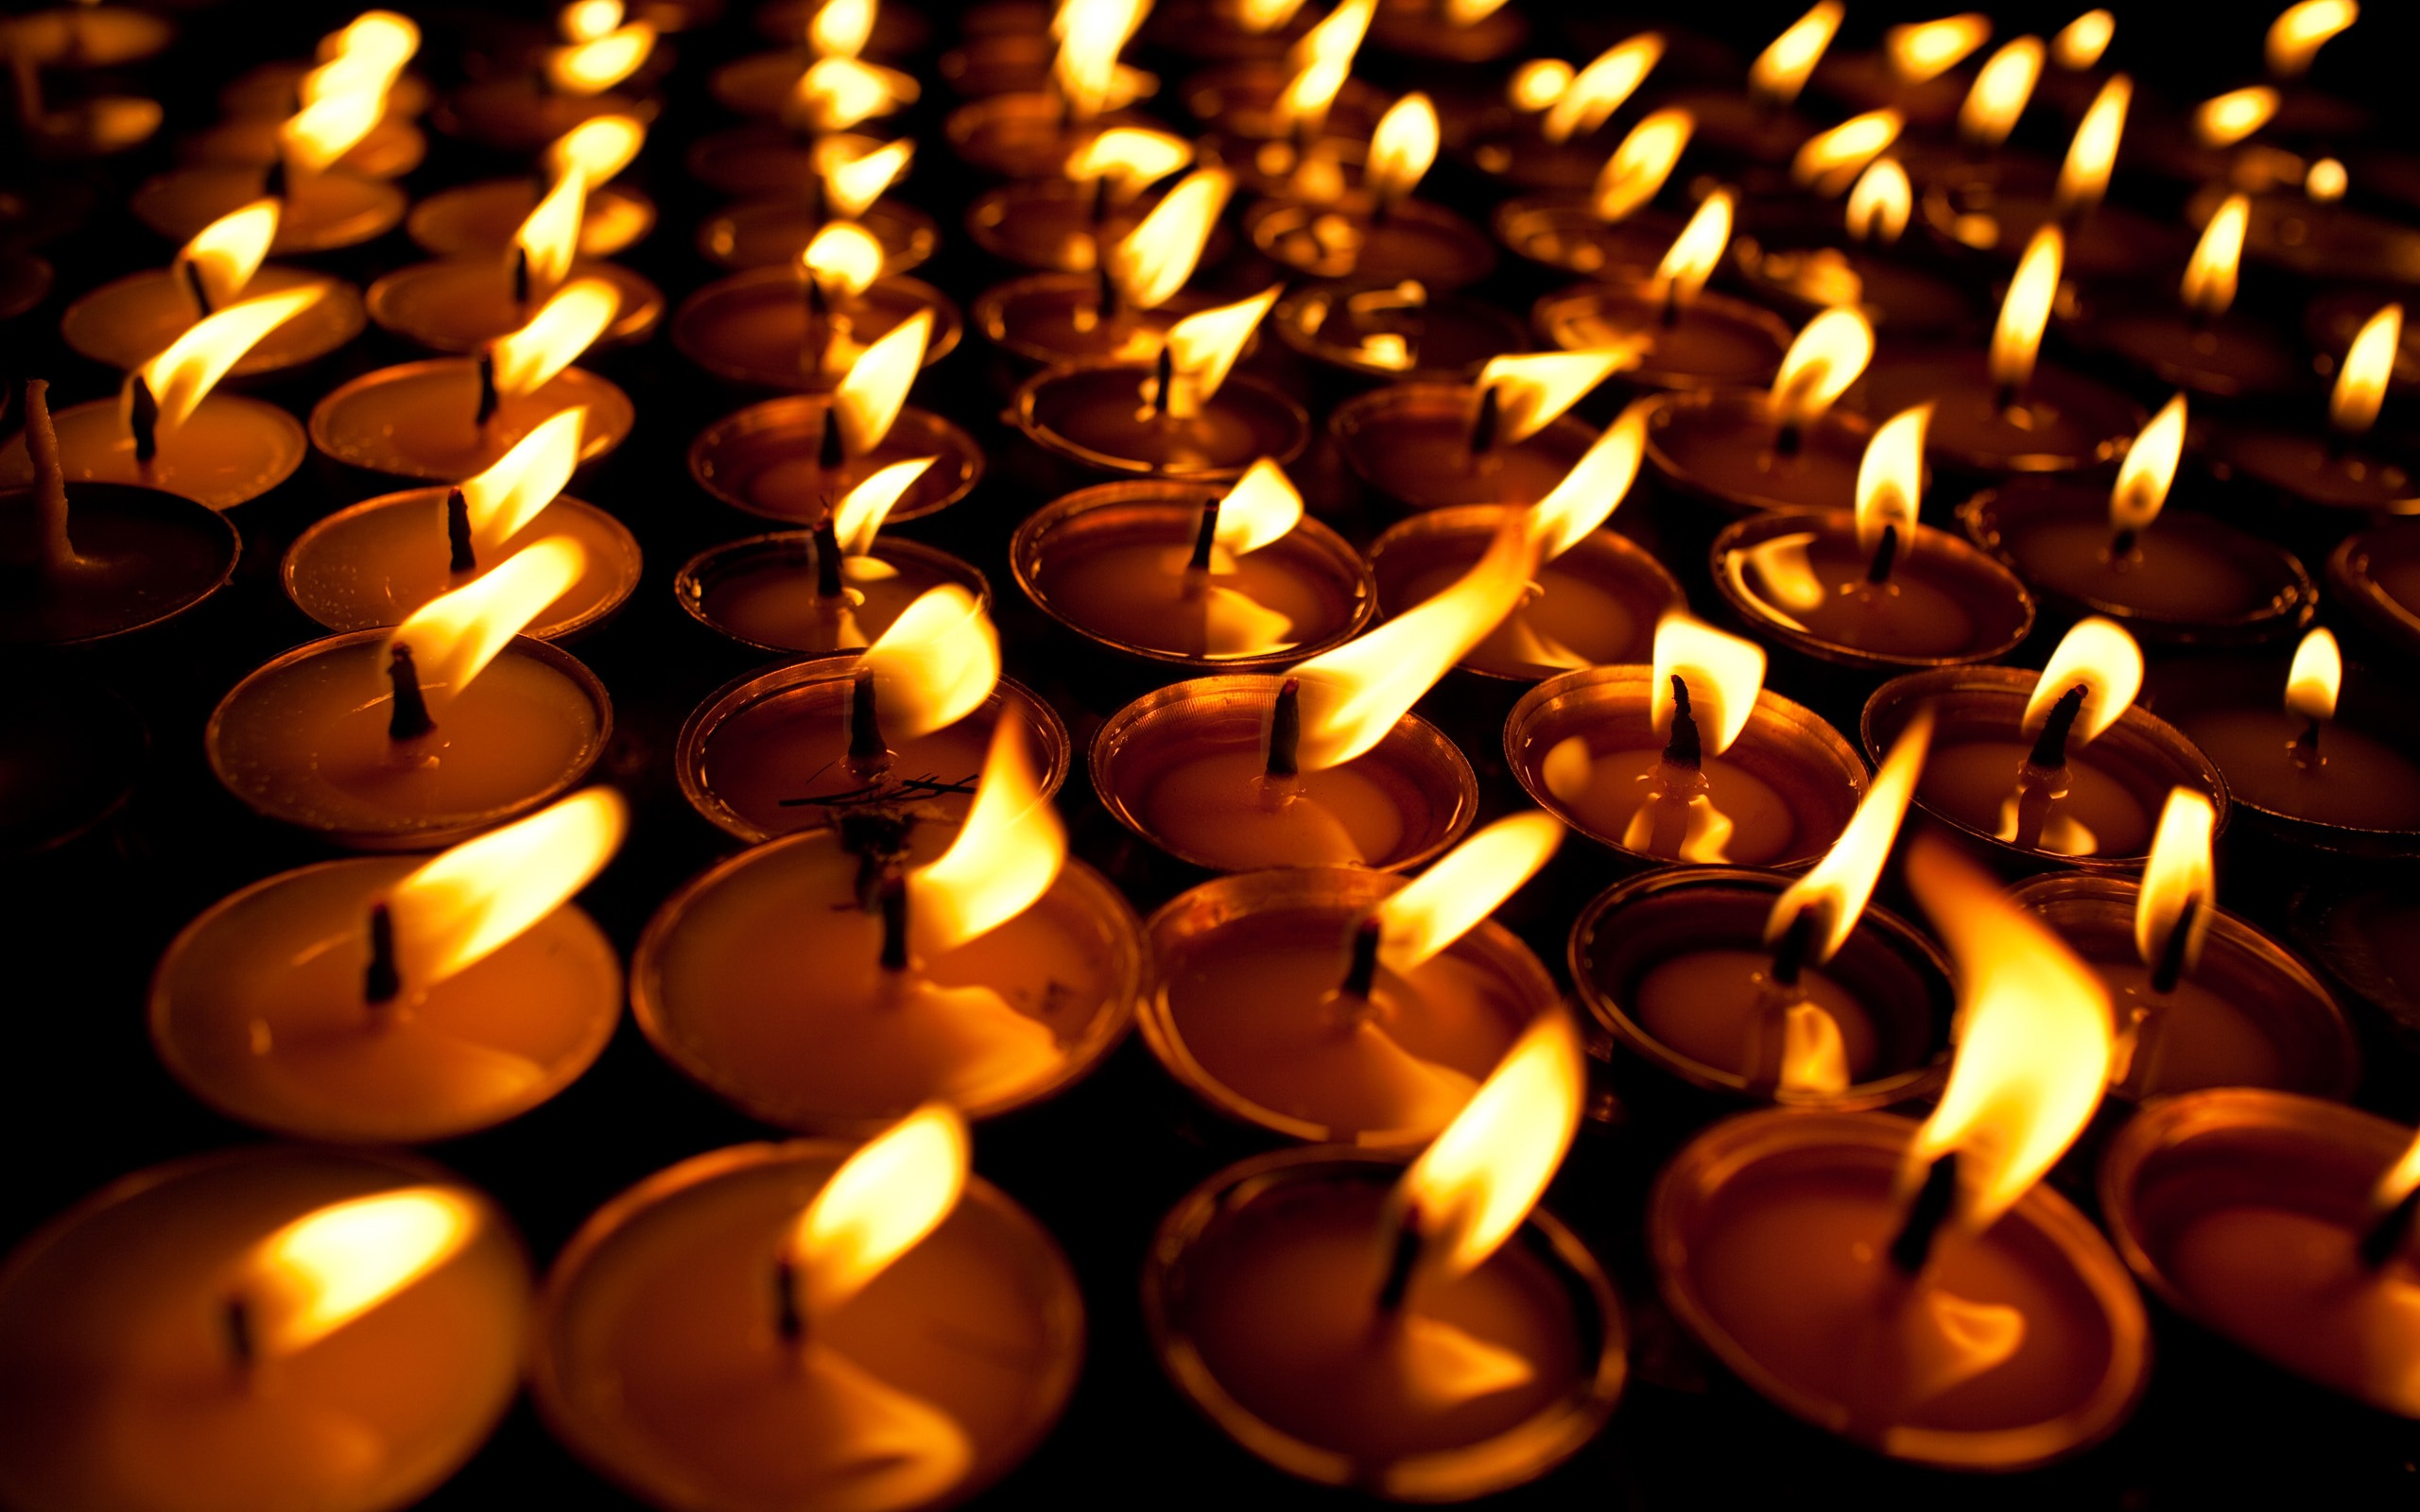 Candle HD Wallpaper | Background Image | 2560x1600 | ID ...